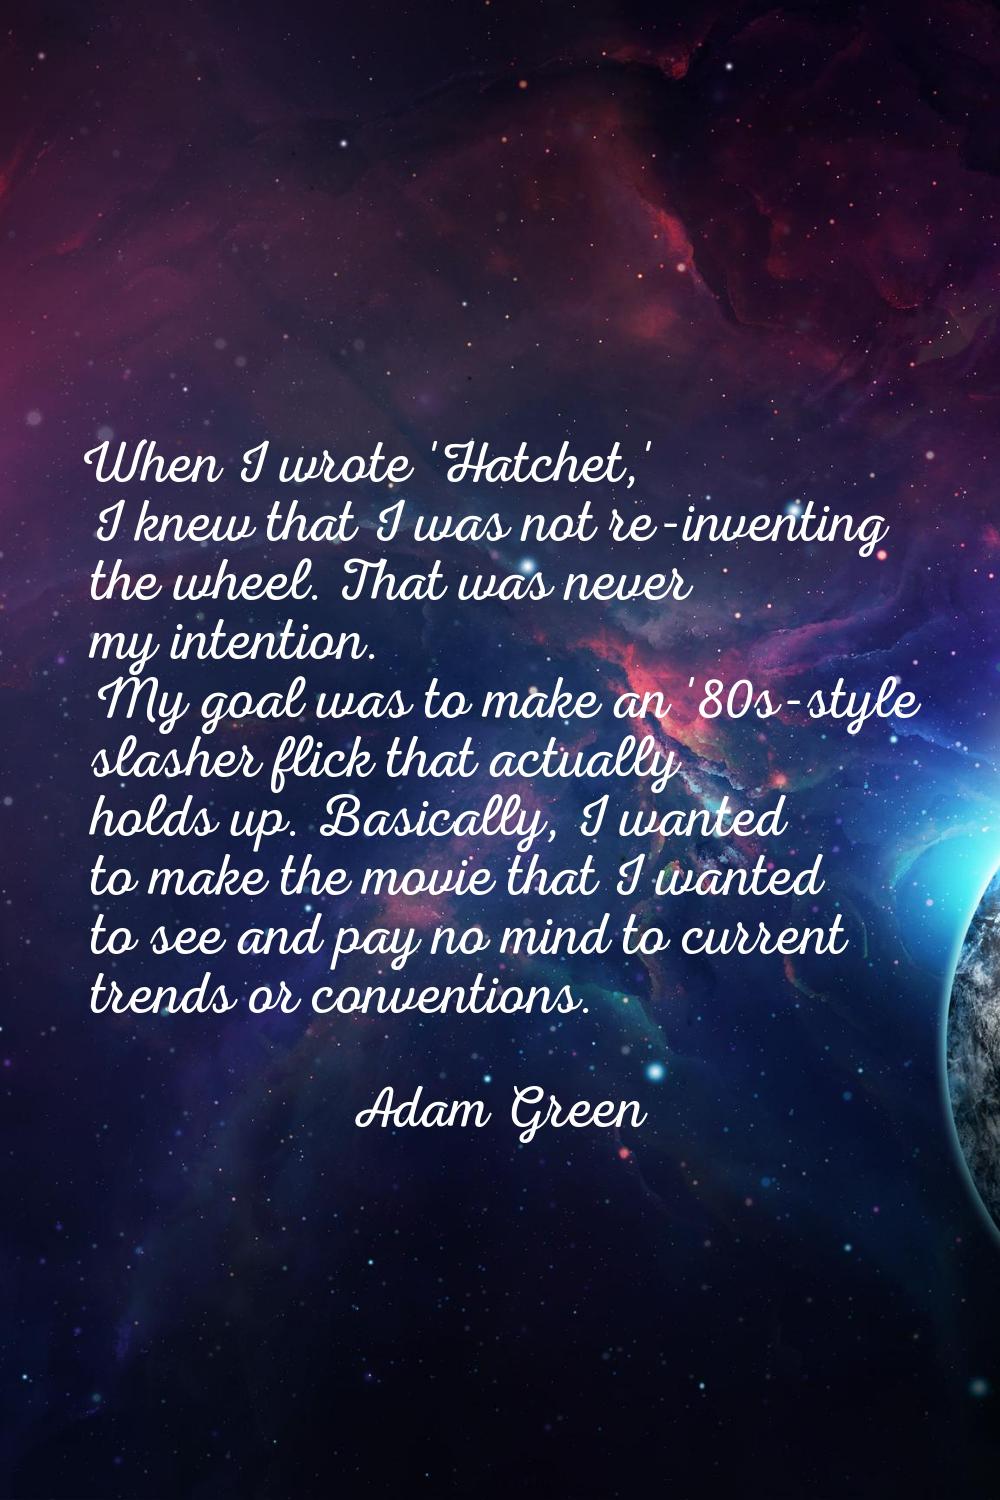 When I wrote 'Hatchet,' I knew that I was not re-inventing the wheel. That was never my intention. 